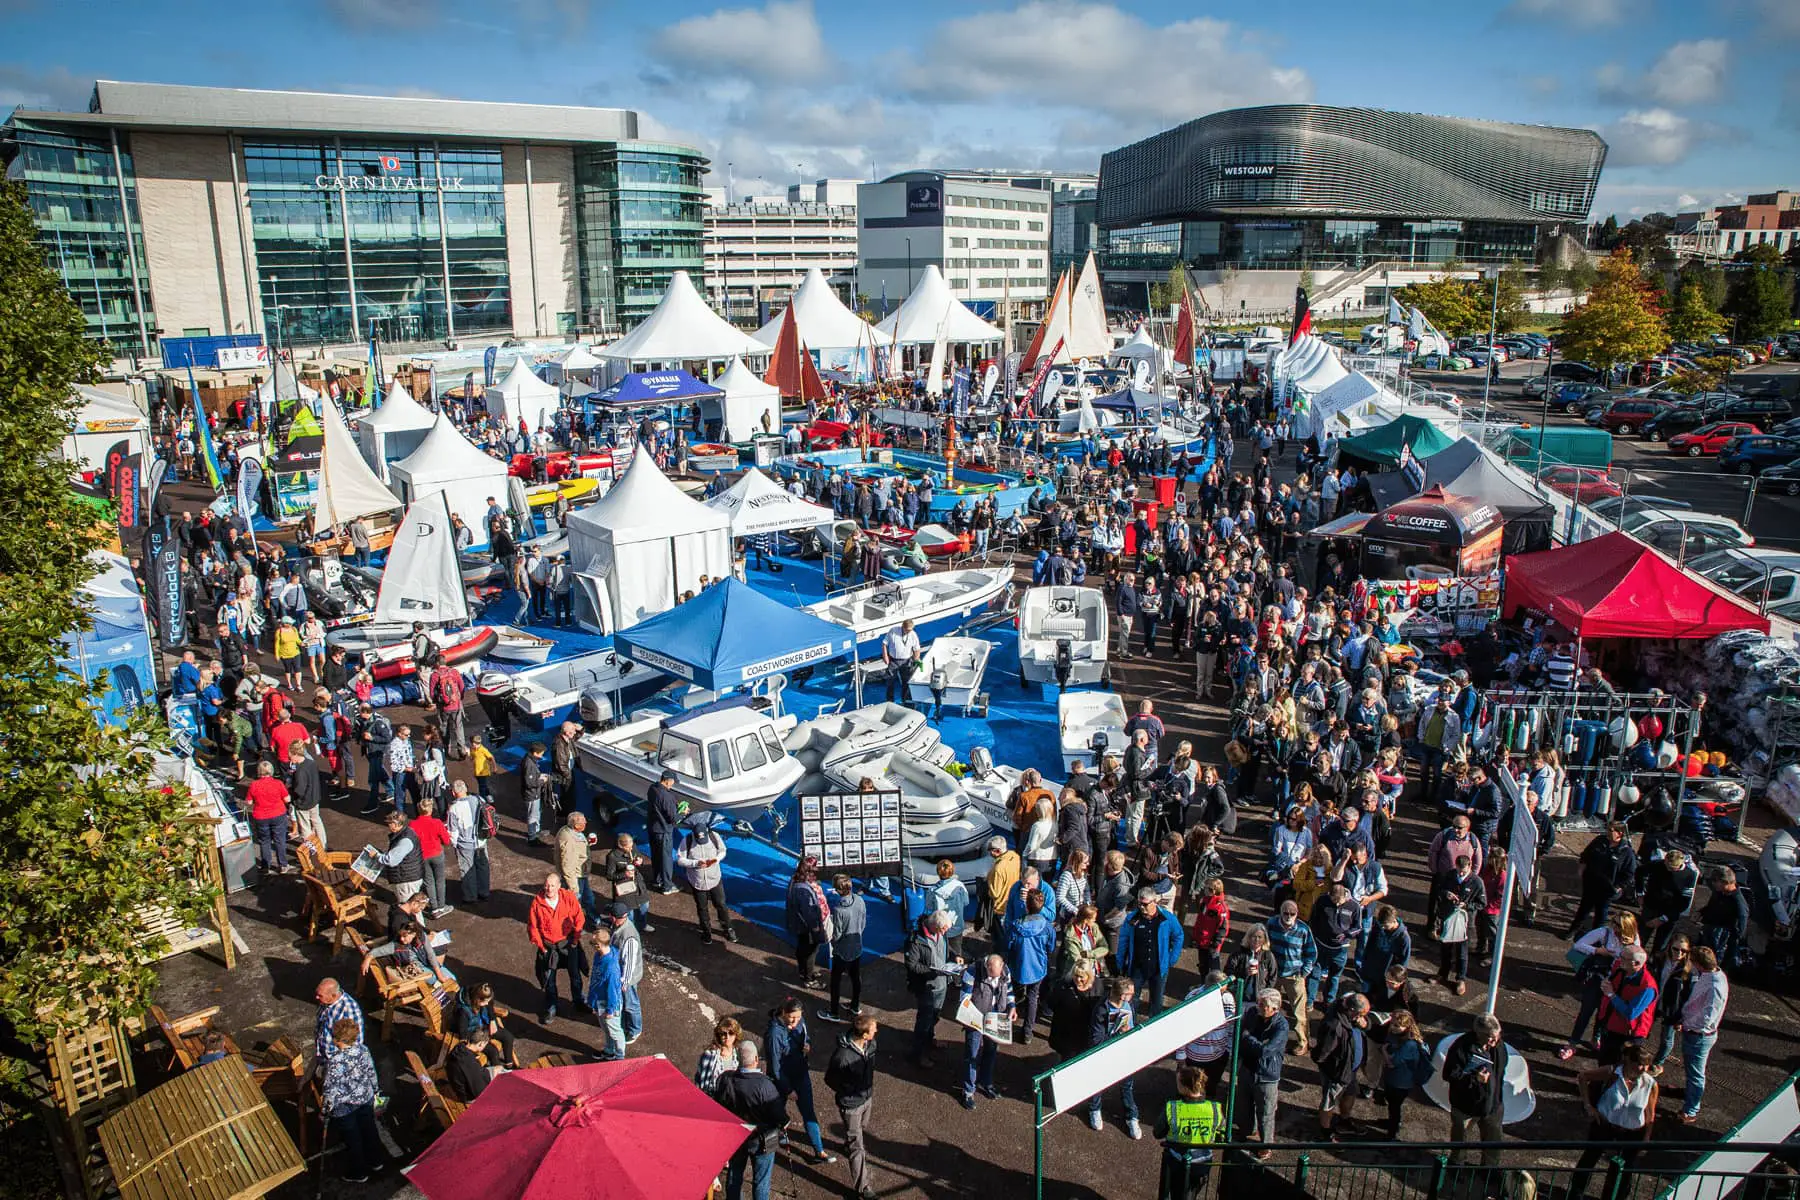 Southampton International Boat Show from the air